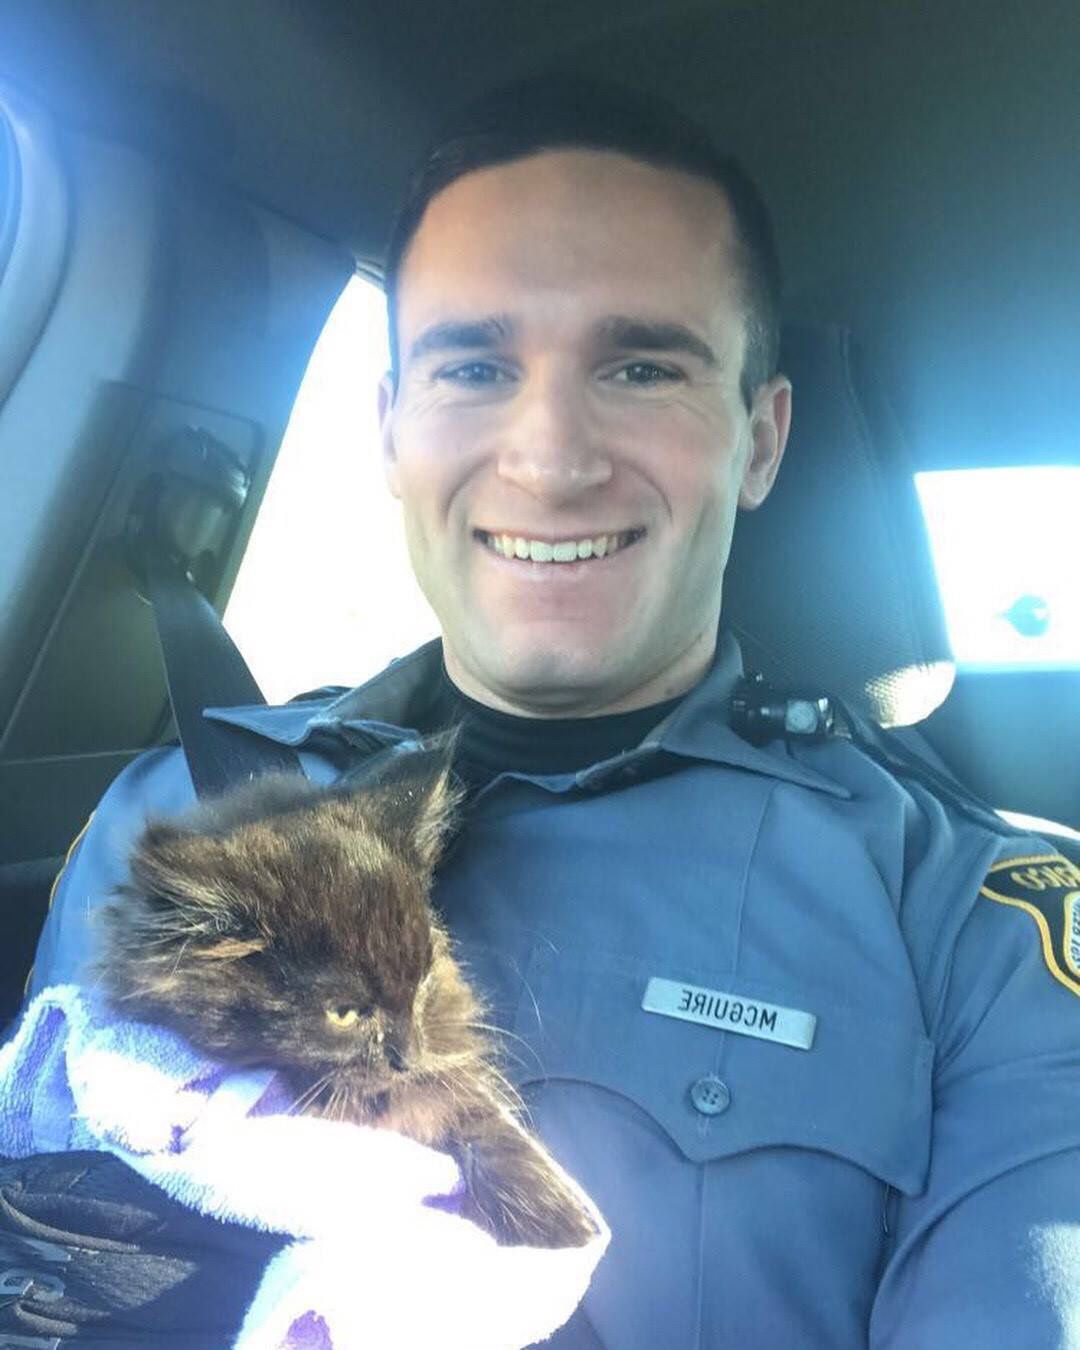 Officer Calms Frightened Kitten With Kitty Voice After Rescuing